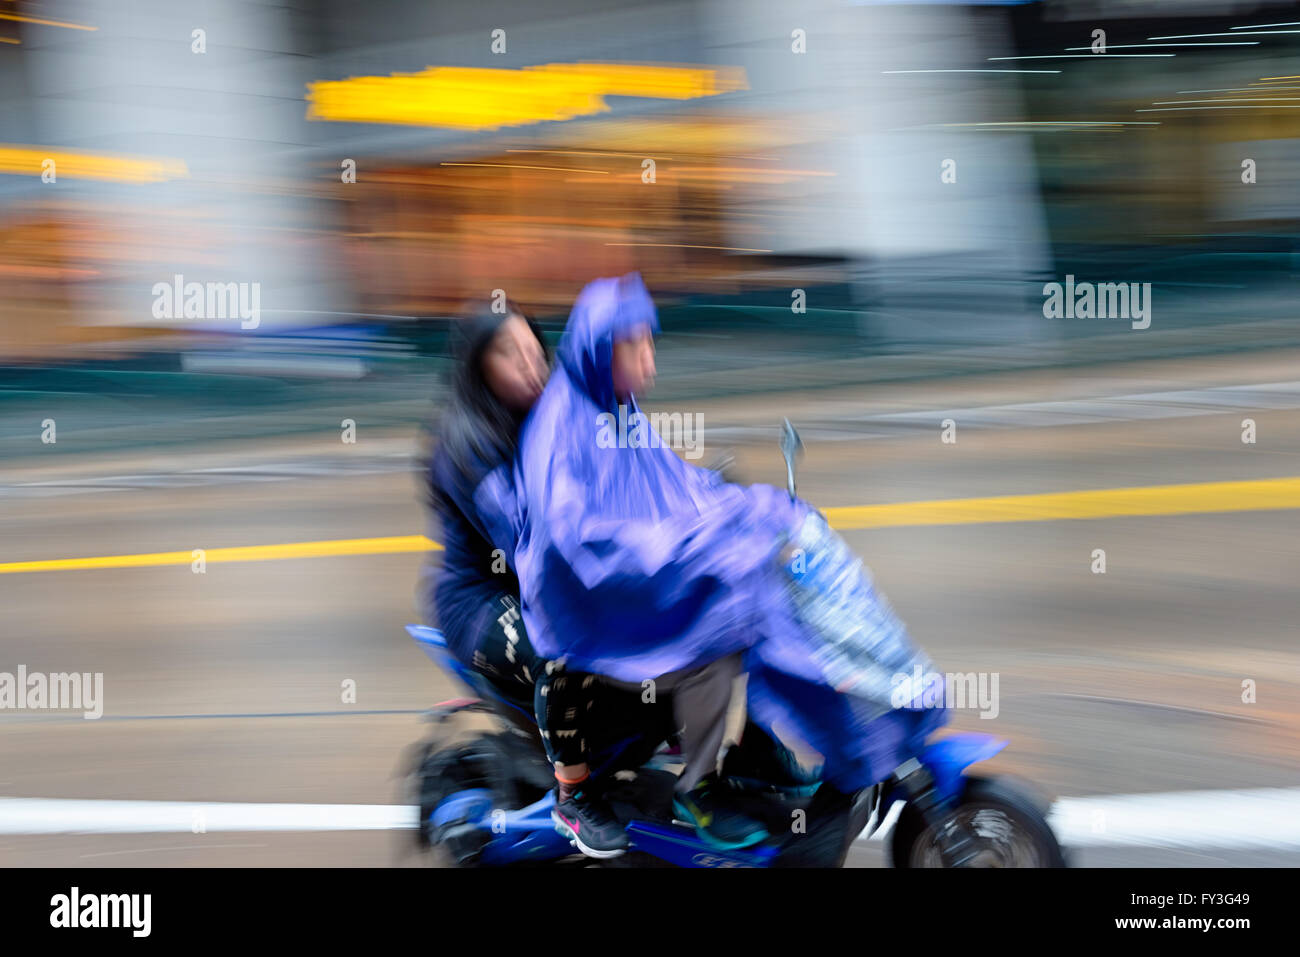 Shanghai, China - October 5, 2015: Couple riding an electric bike in the rain in Shanghai China. Stock Photo